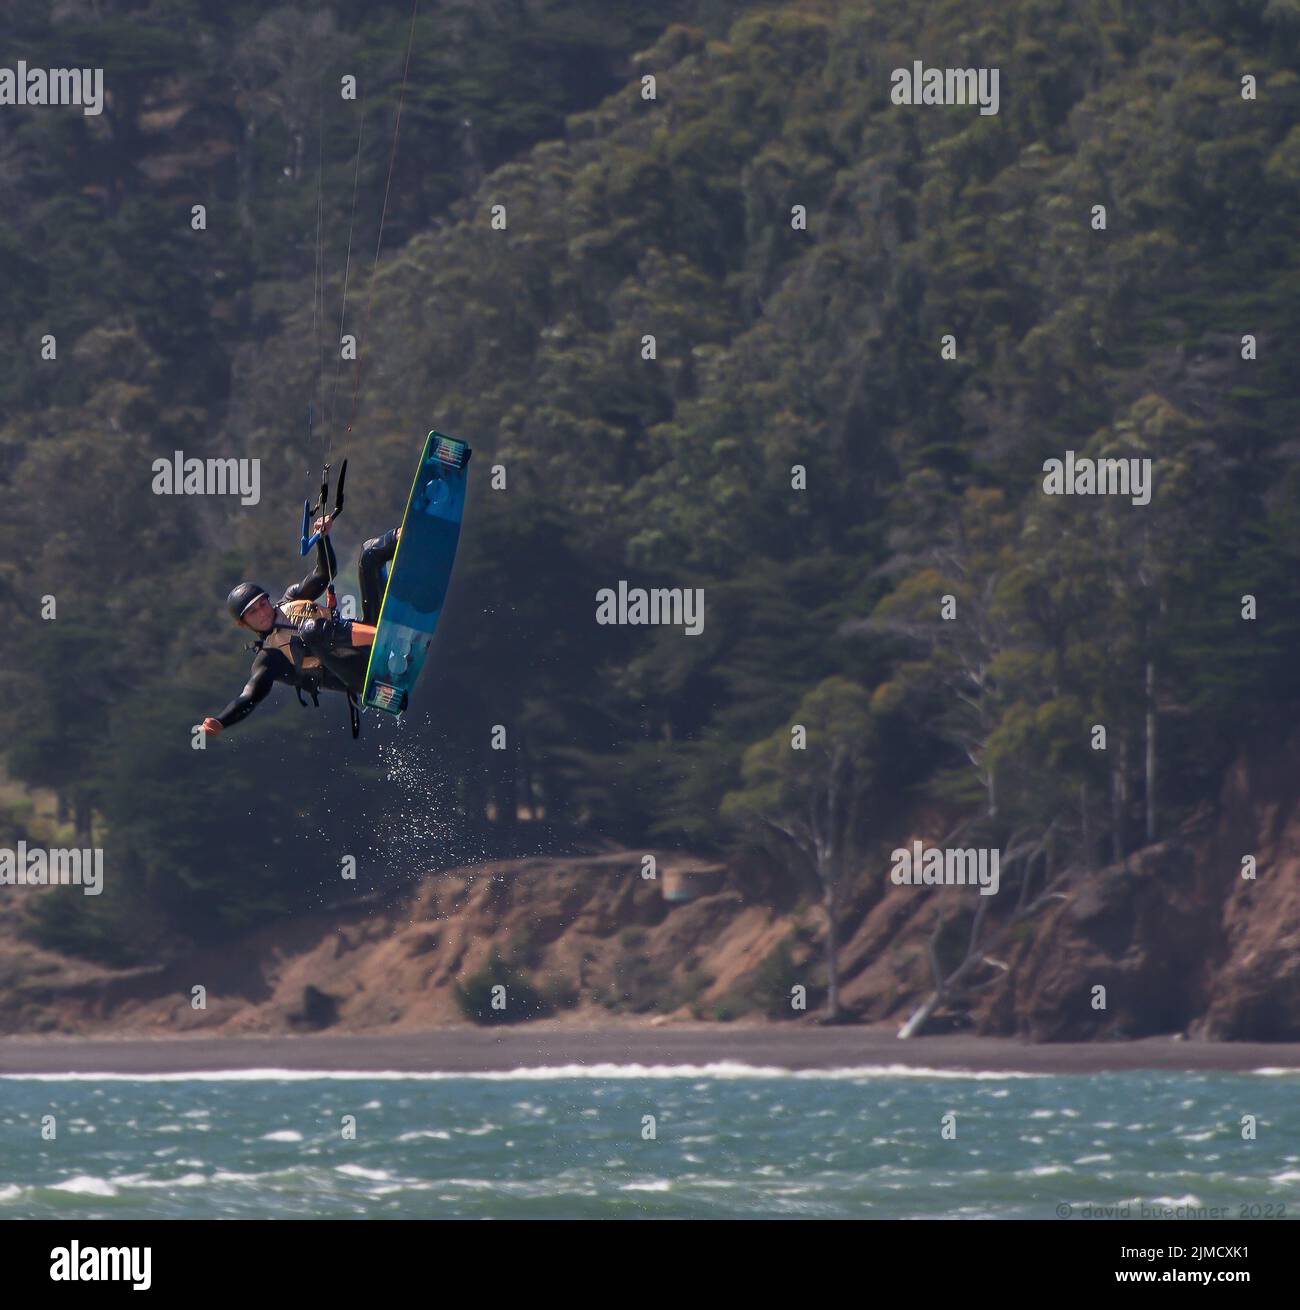 Kitesurfer lifted into the air above whitecaps against the backdrop of the Marin Headlands in San Francisco Stock Photo